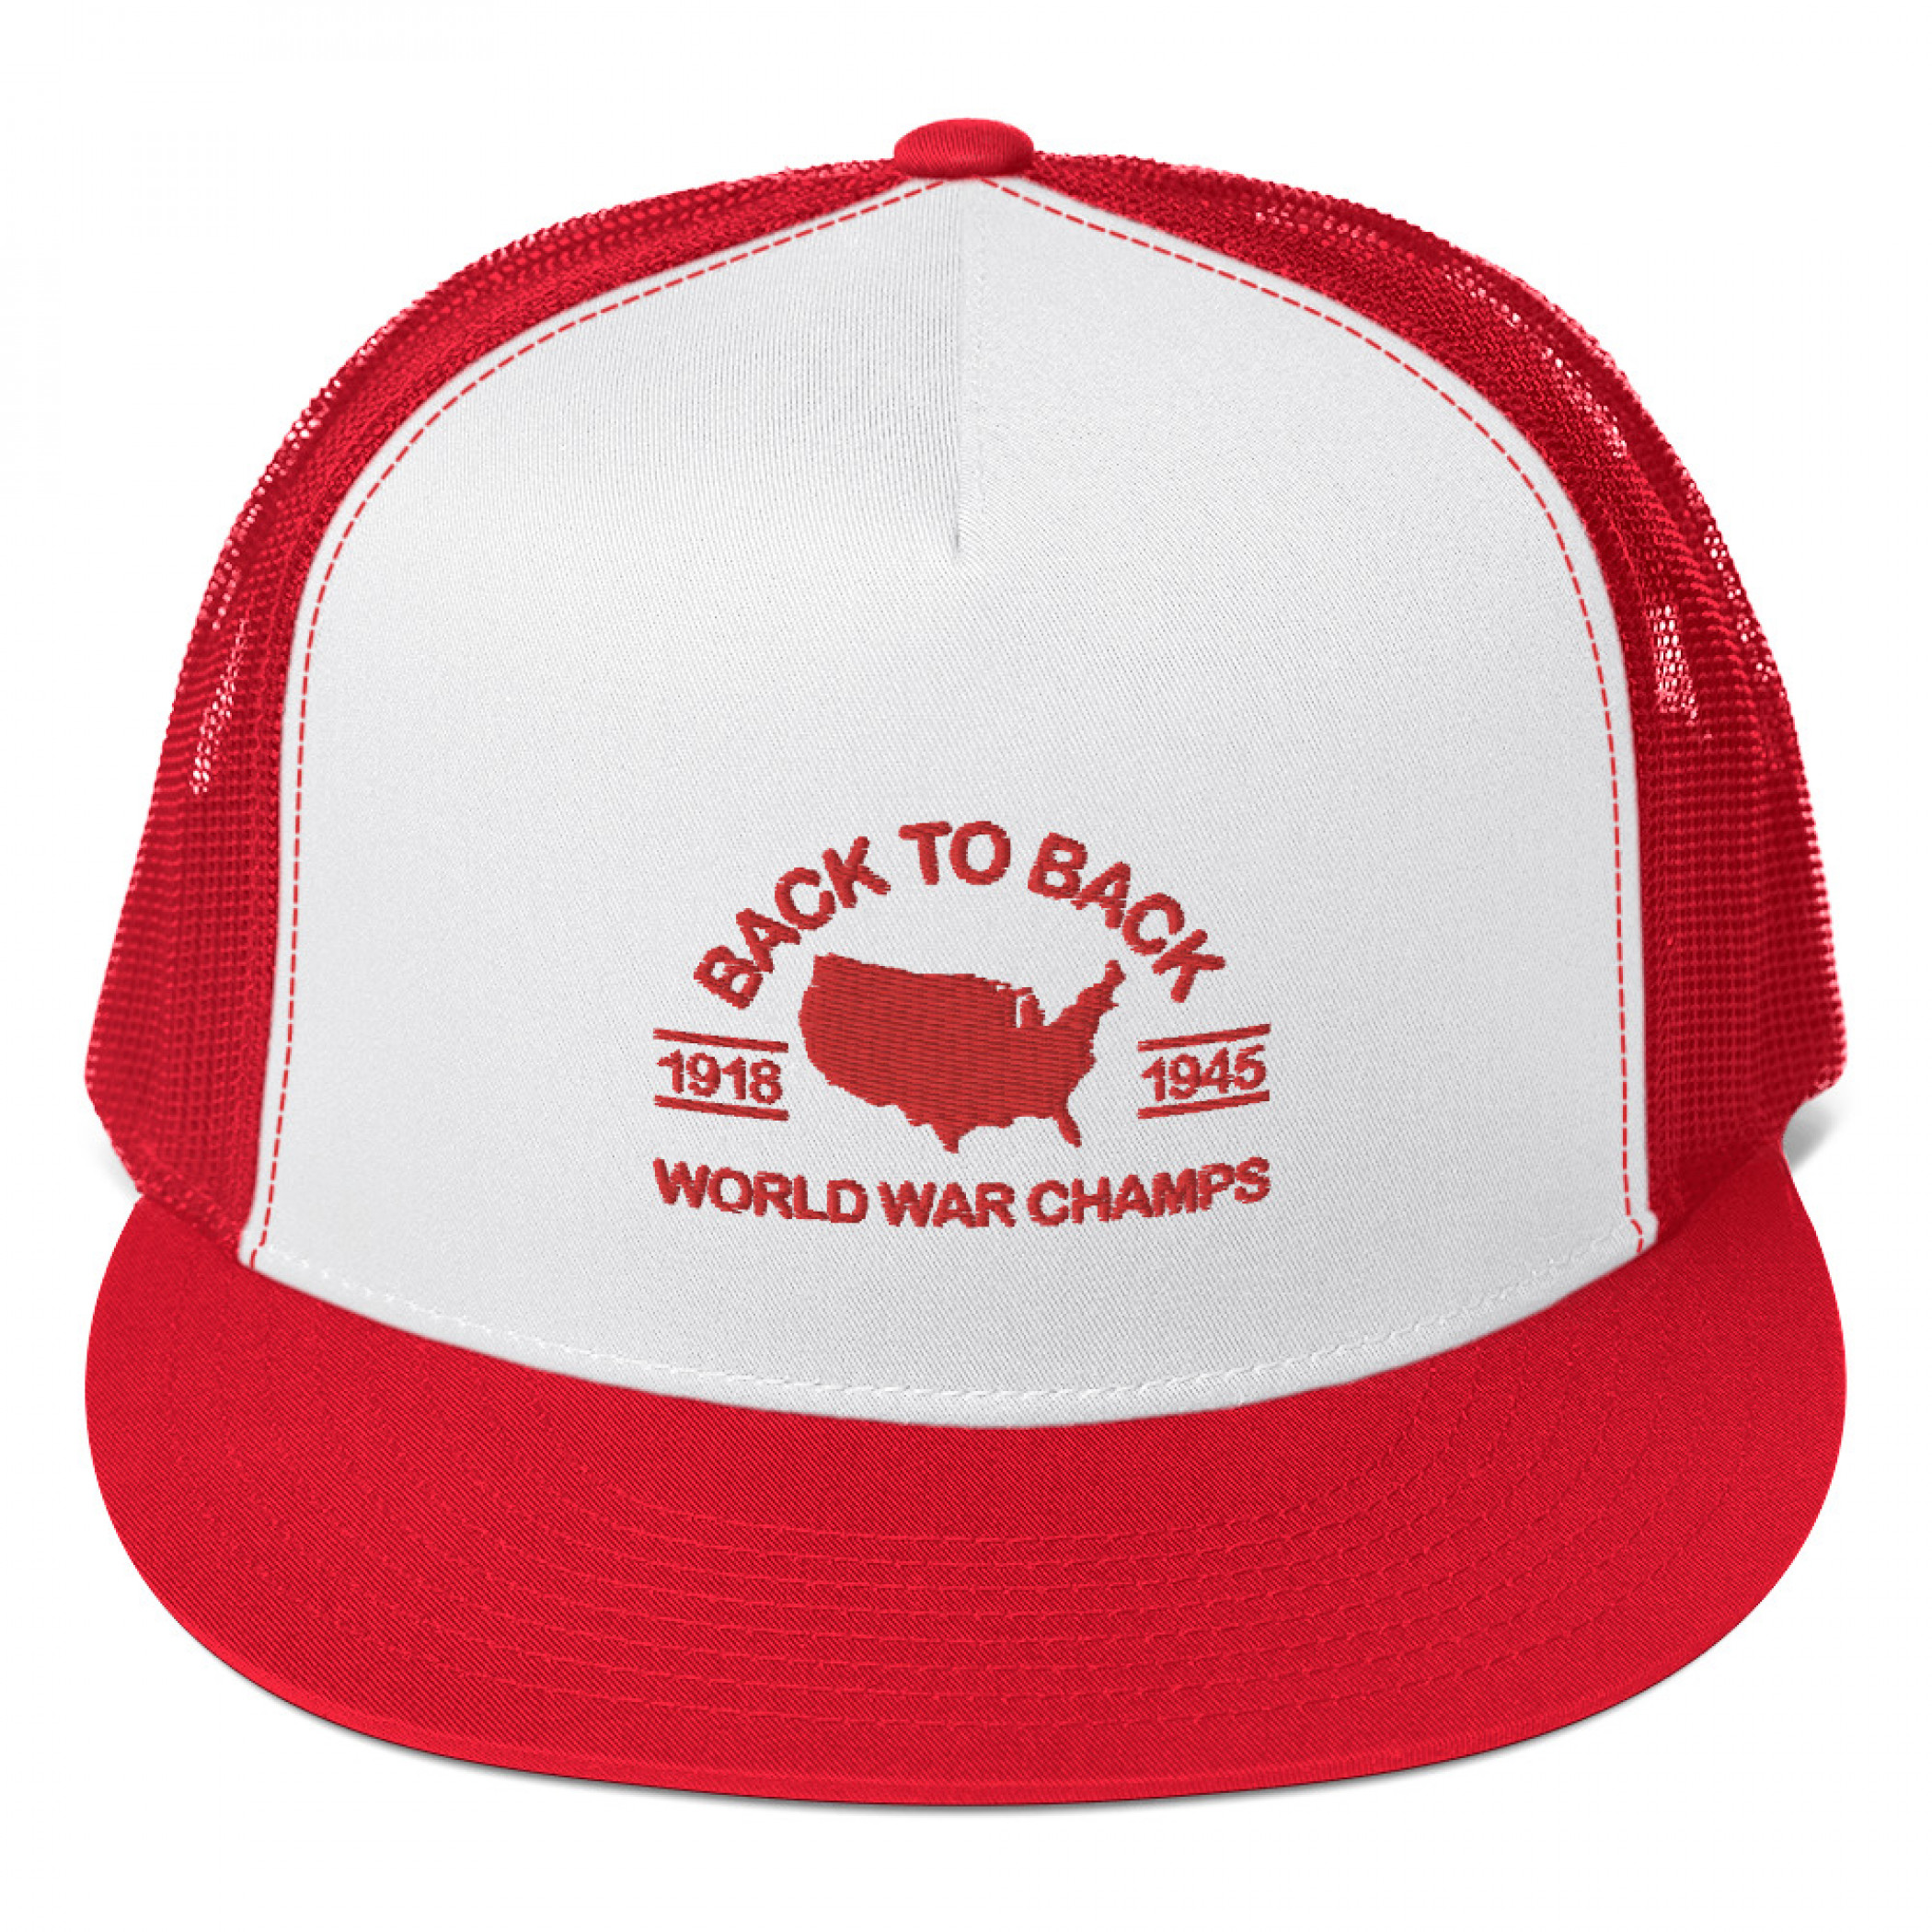 Back To Back World War Champs Red Trucker Hat